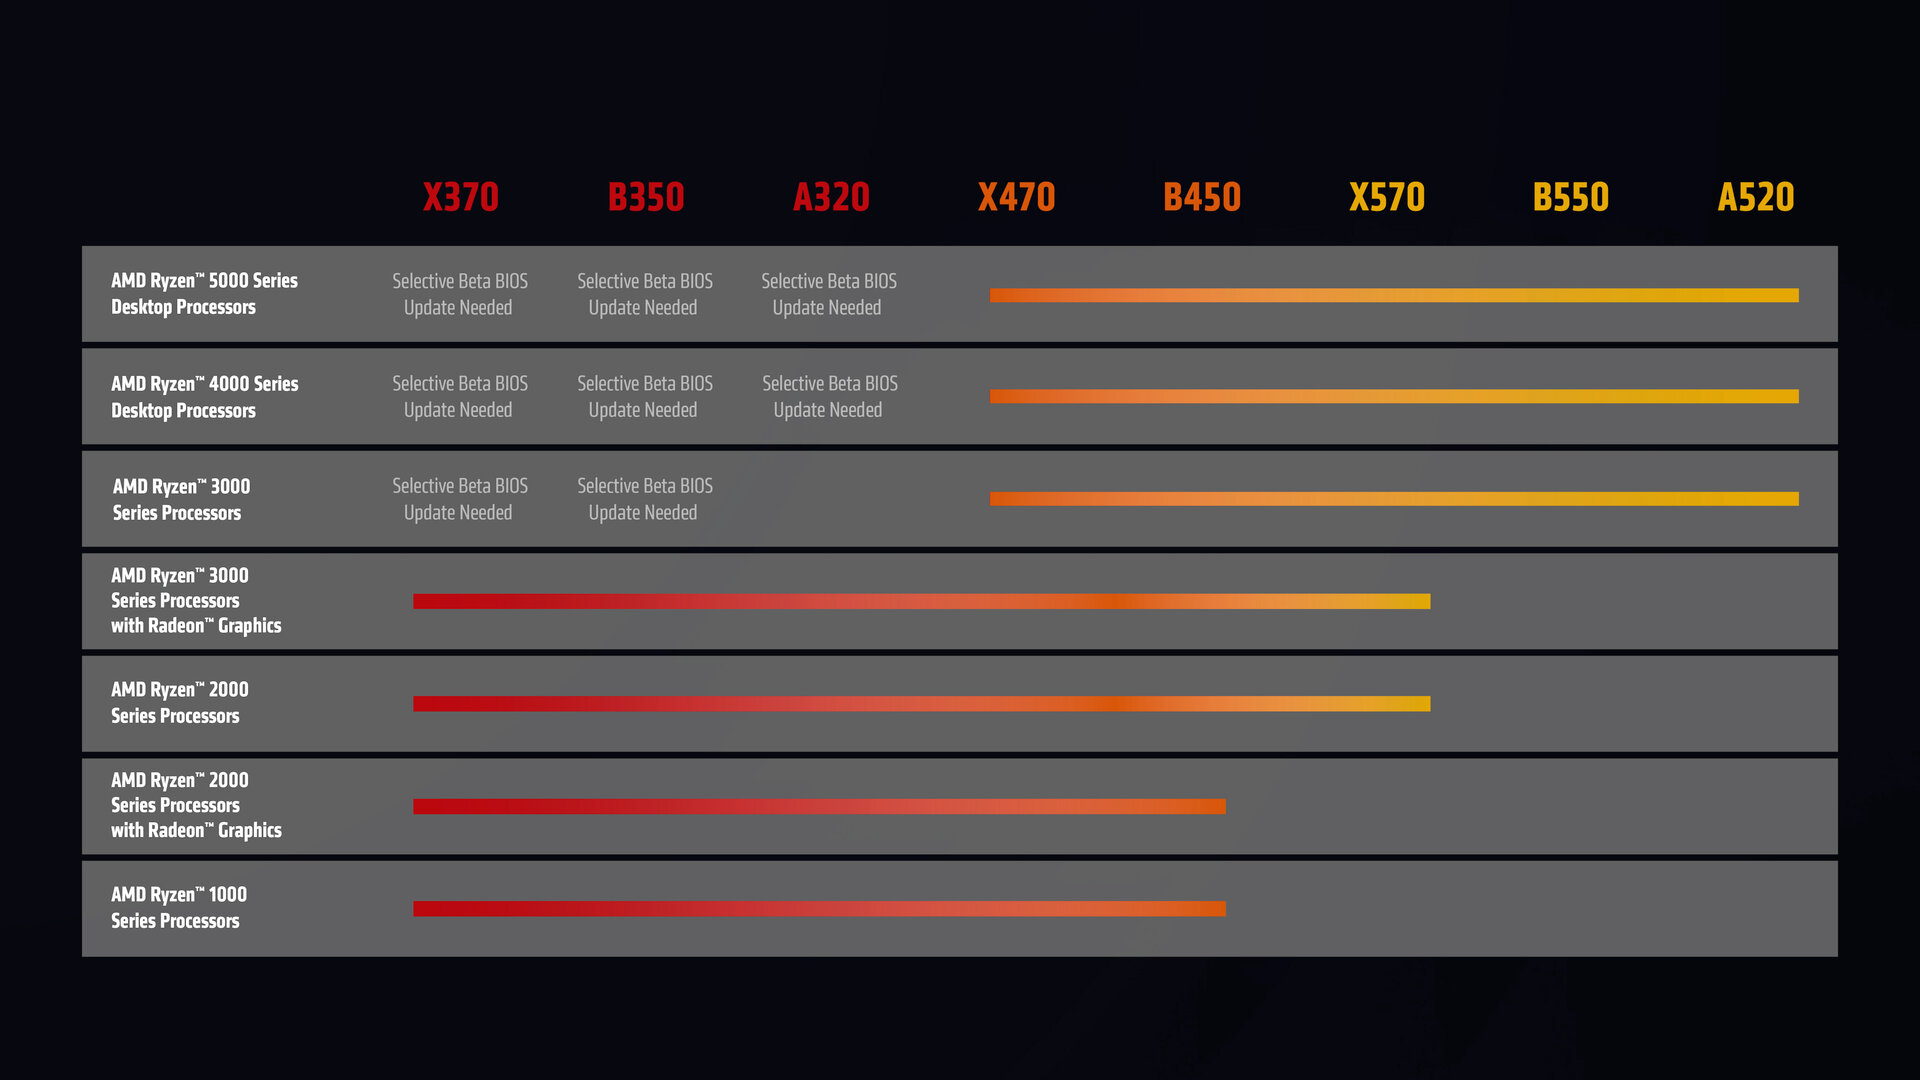 AMD confirms compatibility of Ryzen 4000 and 5000 with chipset 300